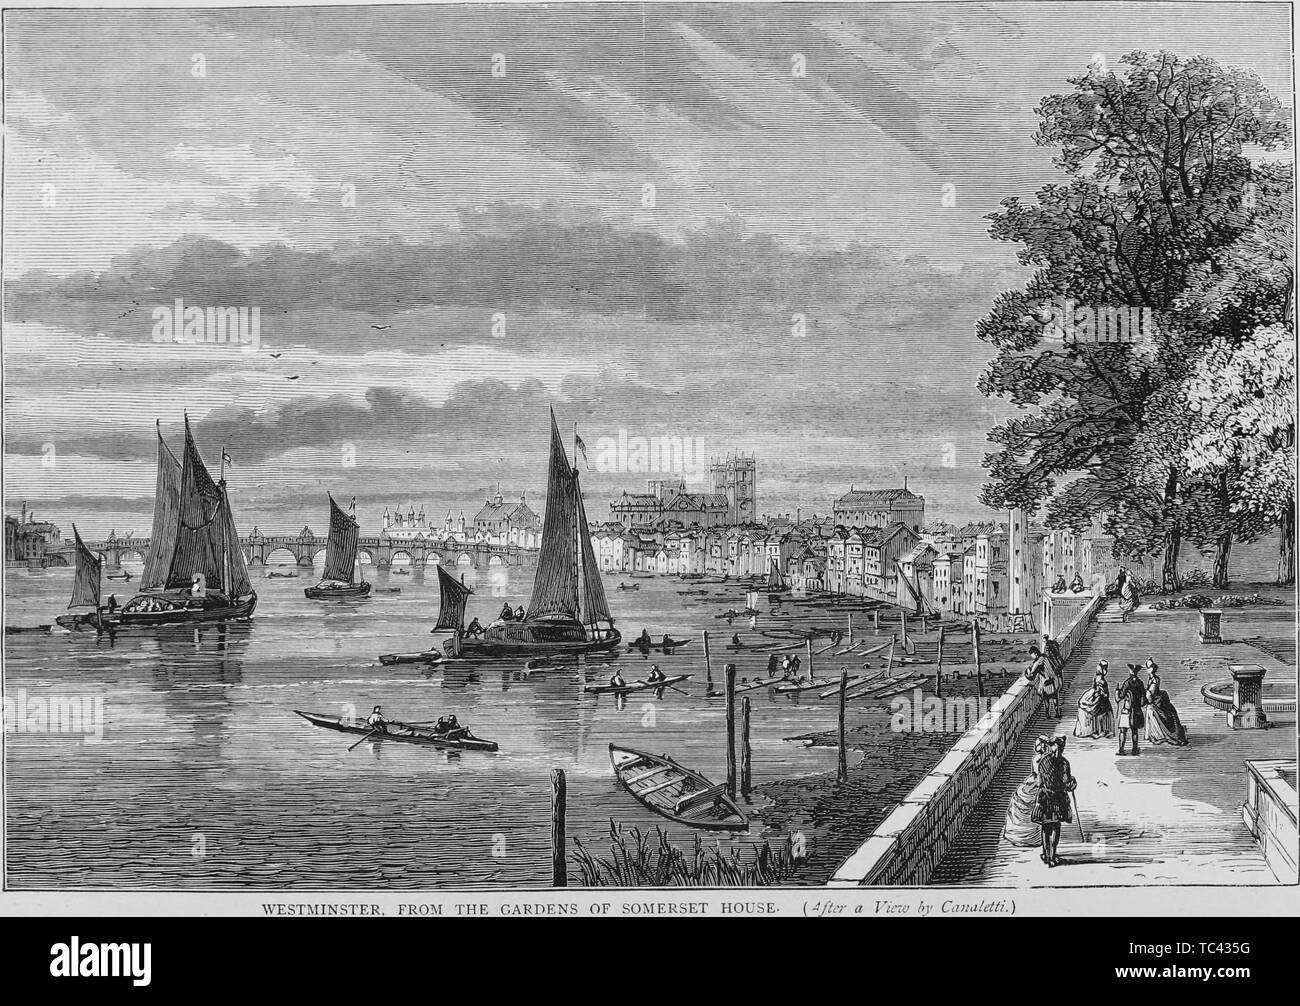 Engraving of the Westminster, viewed from the gardens of Somerset House, London, England, from the book 'Old and new London: a narrative of its history, its people, and its places' by Thornbury Walter, 1873. Courtesy Internet Archive. () Stock Photo